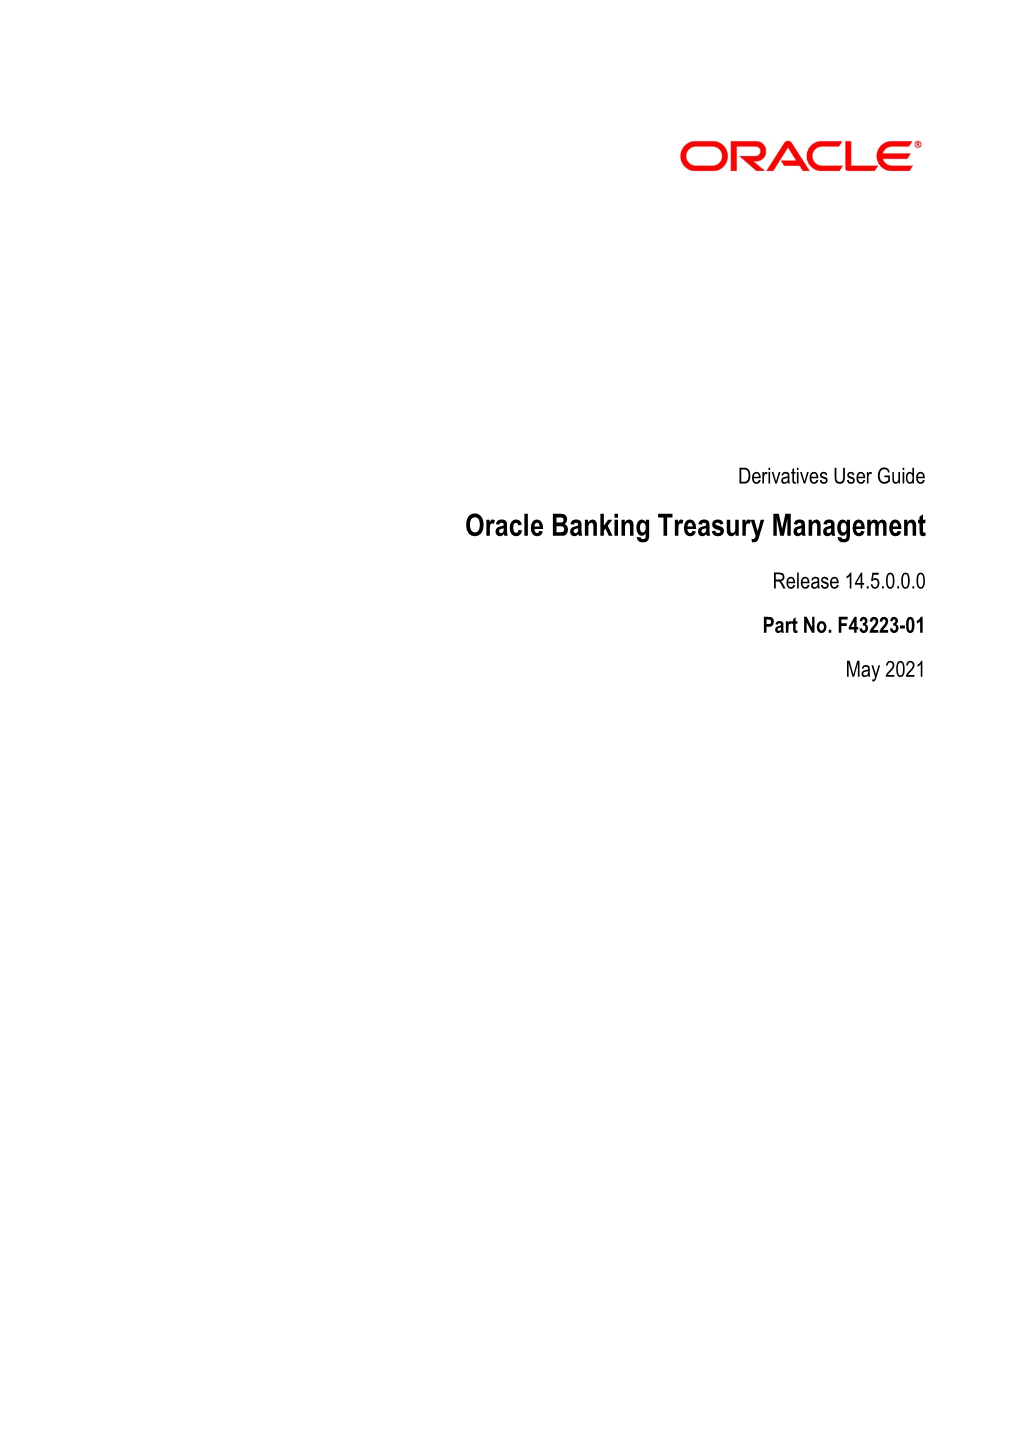 Derivatives User Guide Oracle Banking Treasury Management